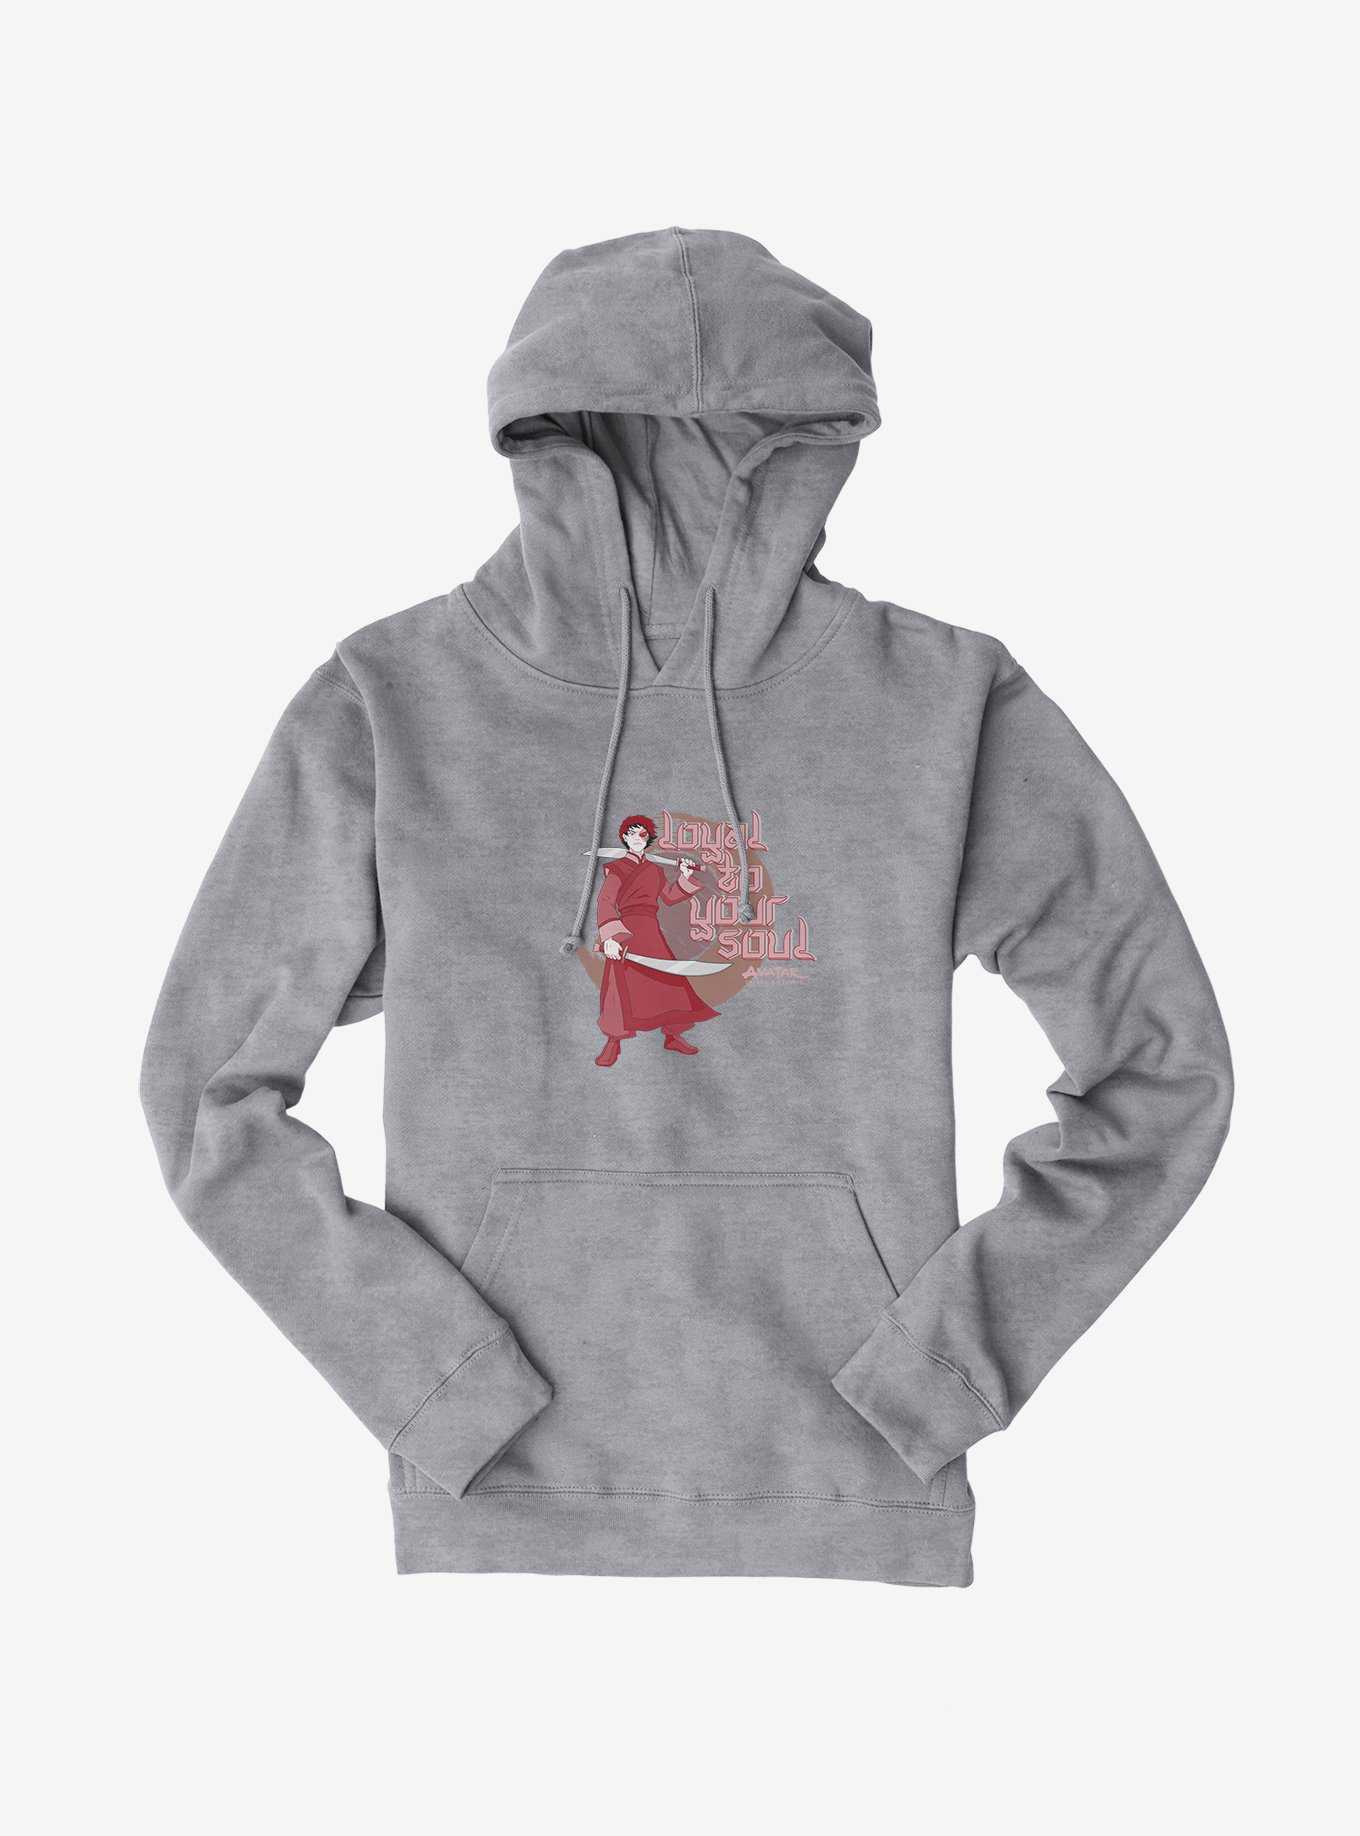 Avatar Loyal To Your Soul Hoodie, HEATHER GREY, hi-res